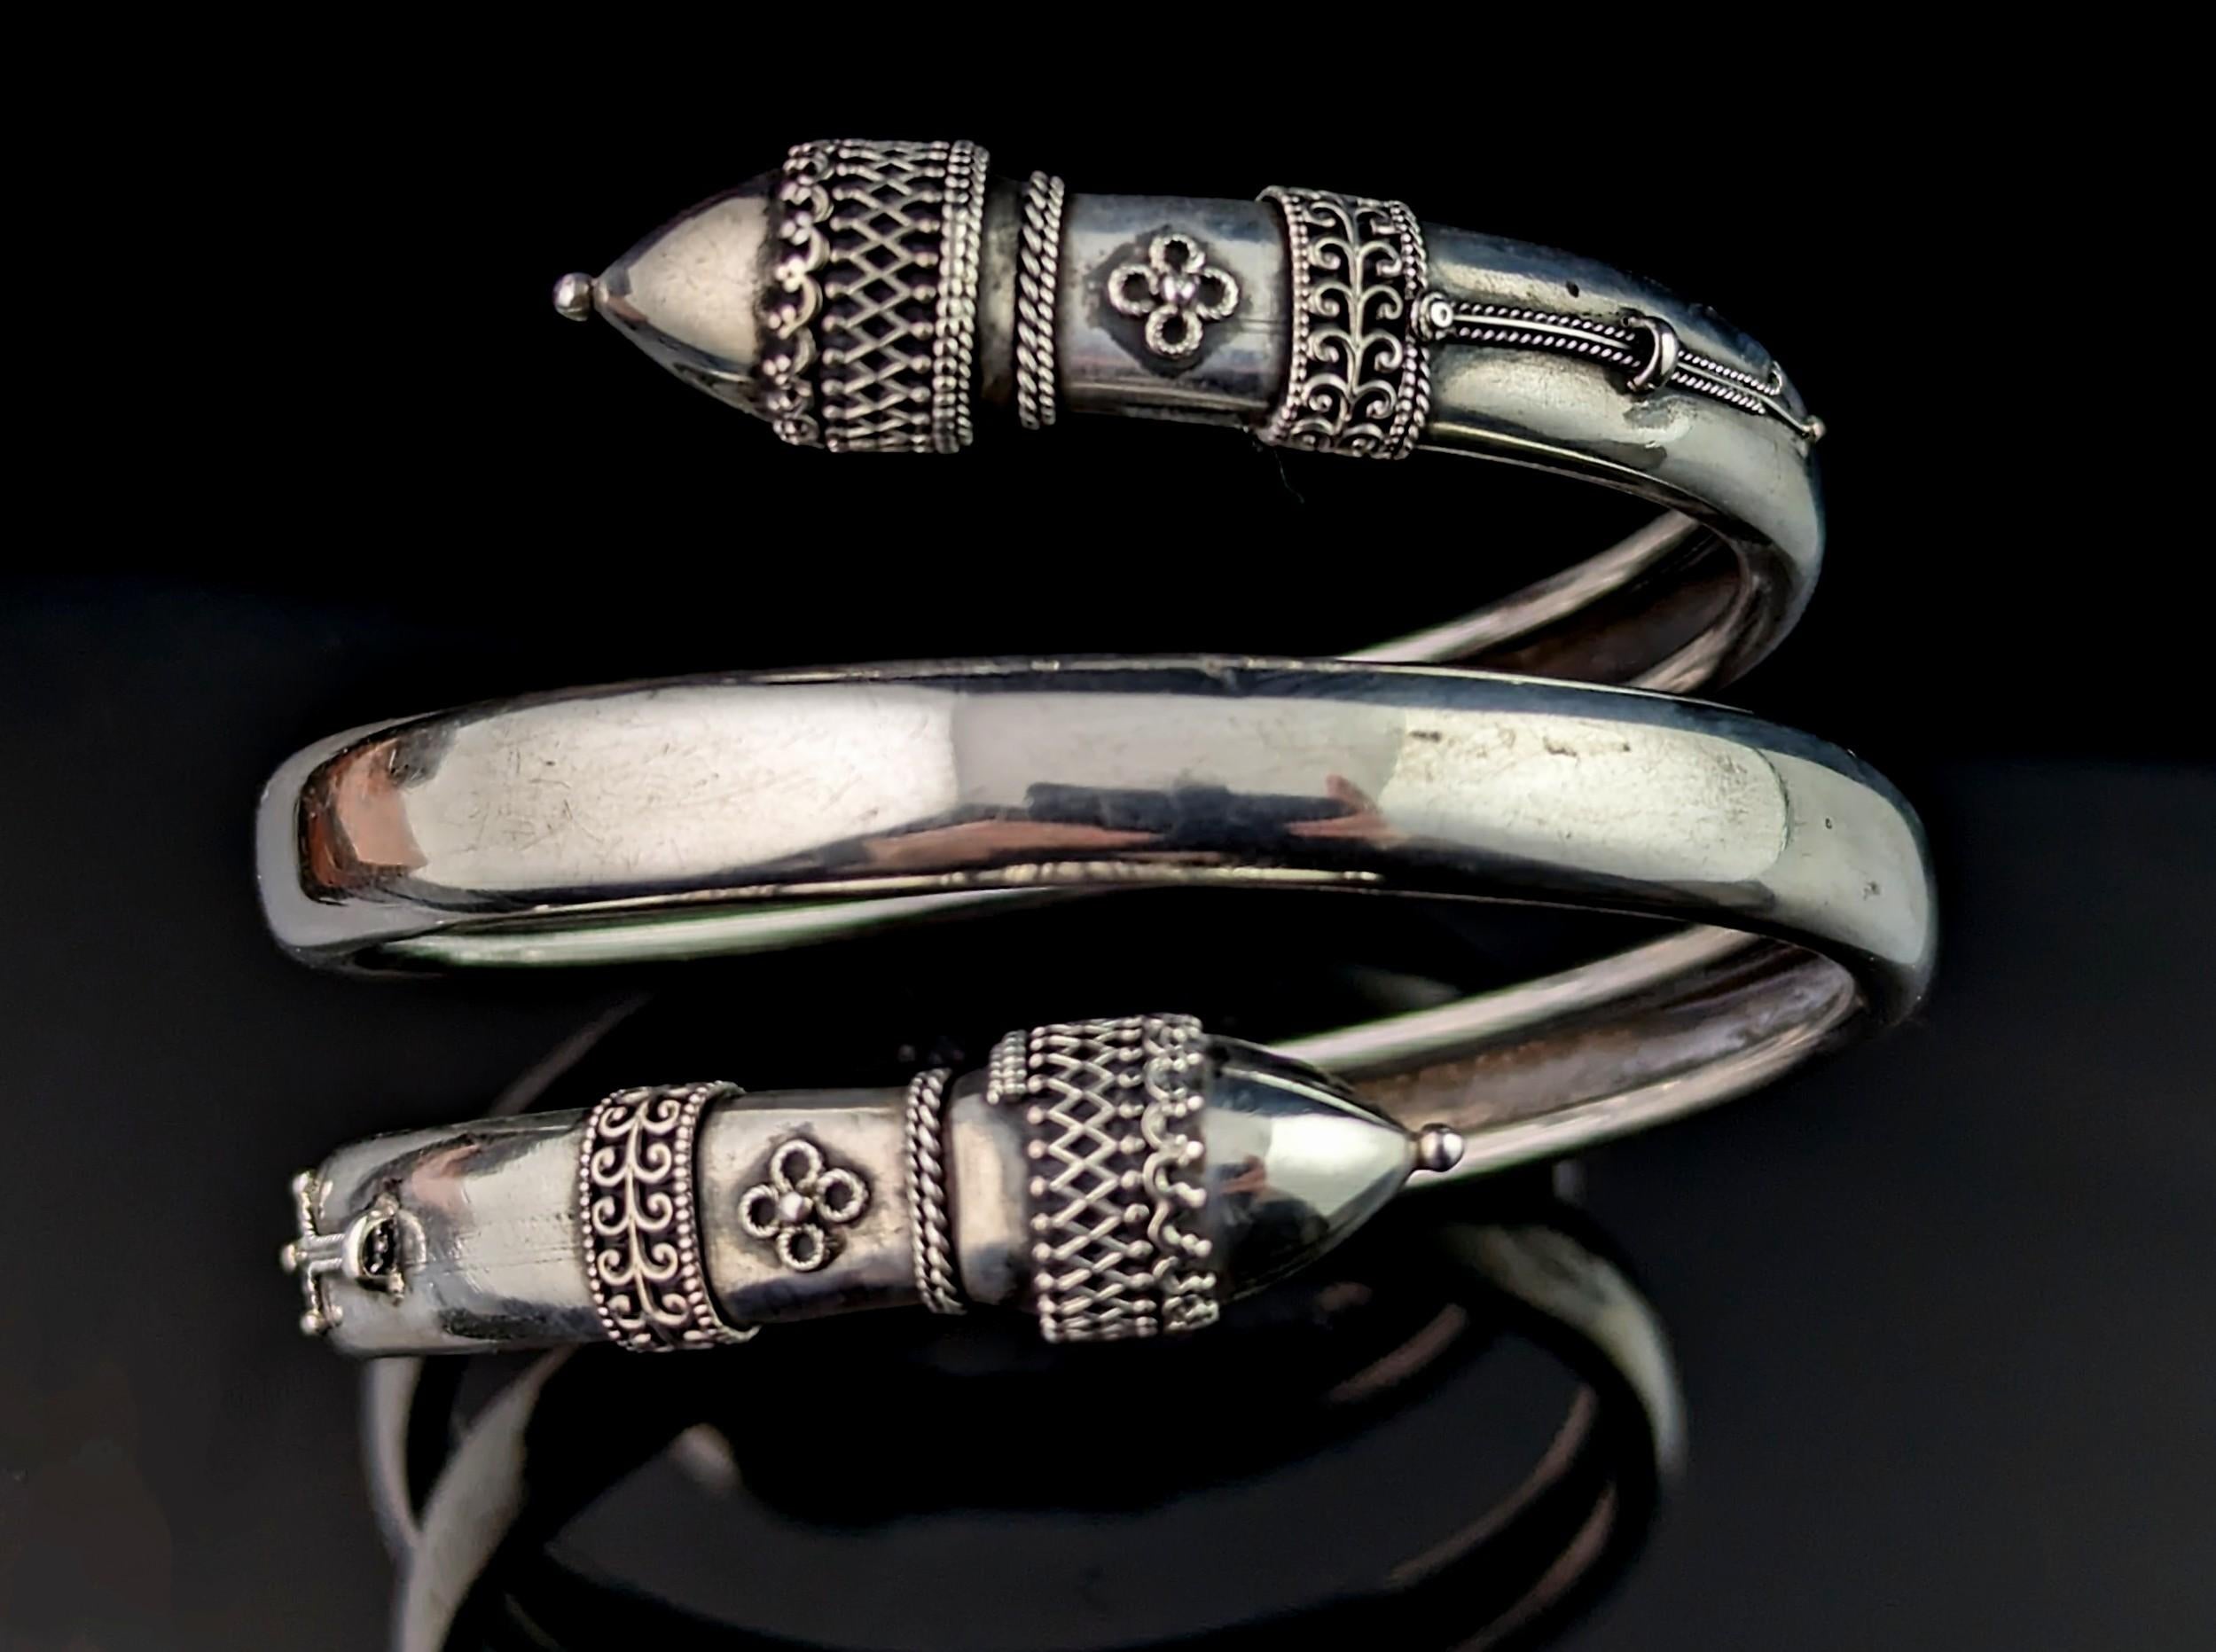 You can't help but be enchanted by this truly beautiful antique Victorian silver bypass bangle.

Designed in the Etruscan revival manner it has decorative finials with applied silver wirework, the bangle wrapping around three times, it has a